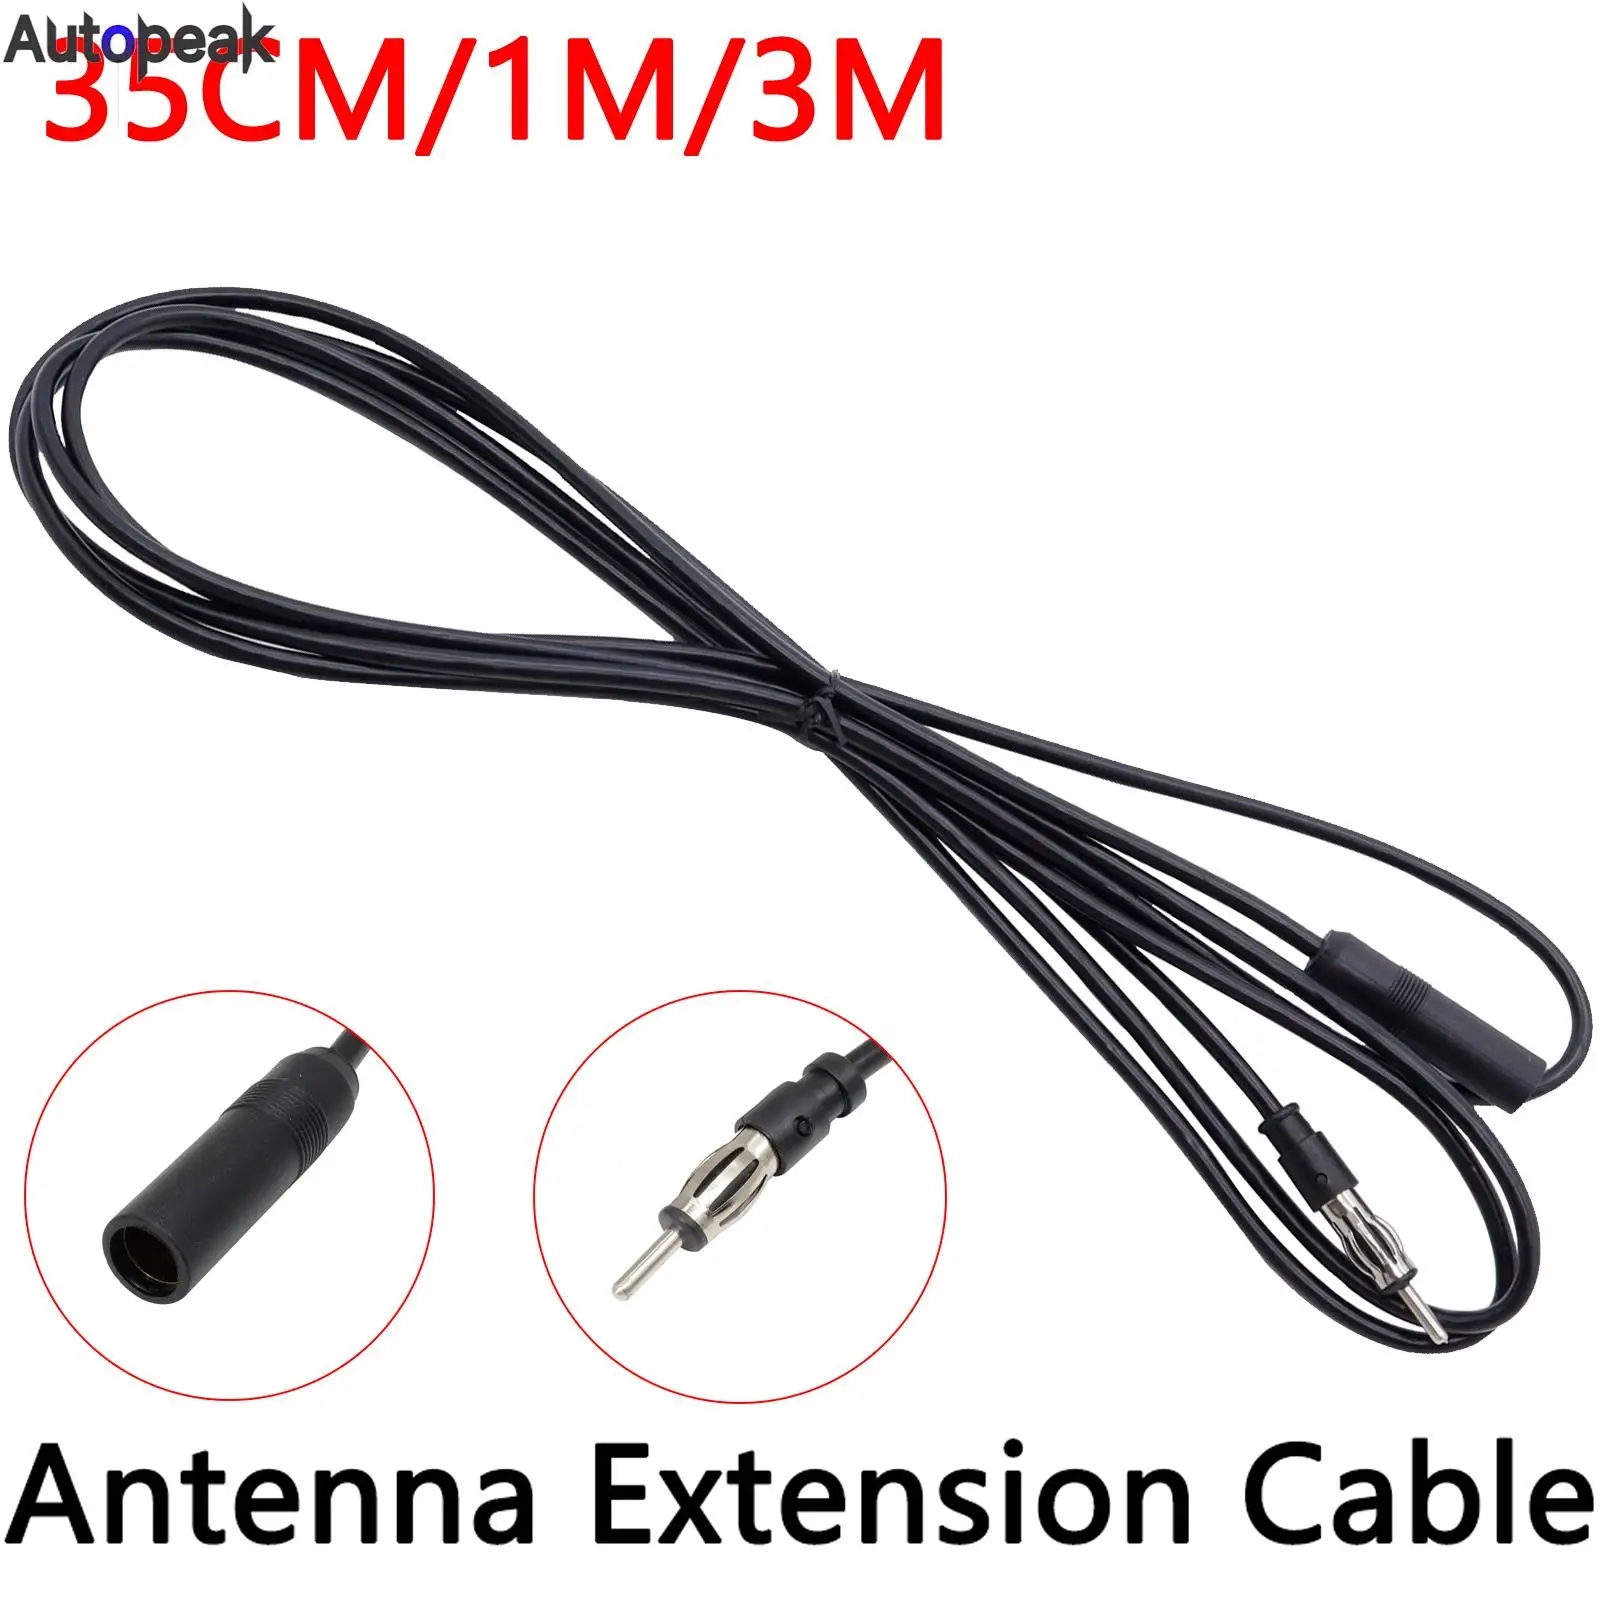 

Car Radio Antenna Extension Cable 35cm/1m/3m Car FM AM Radio Car Antenna Extension Cable Cord DIN Plug Connector Coaxial Cable